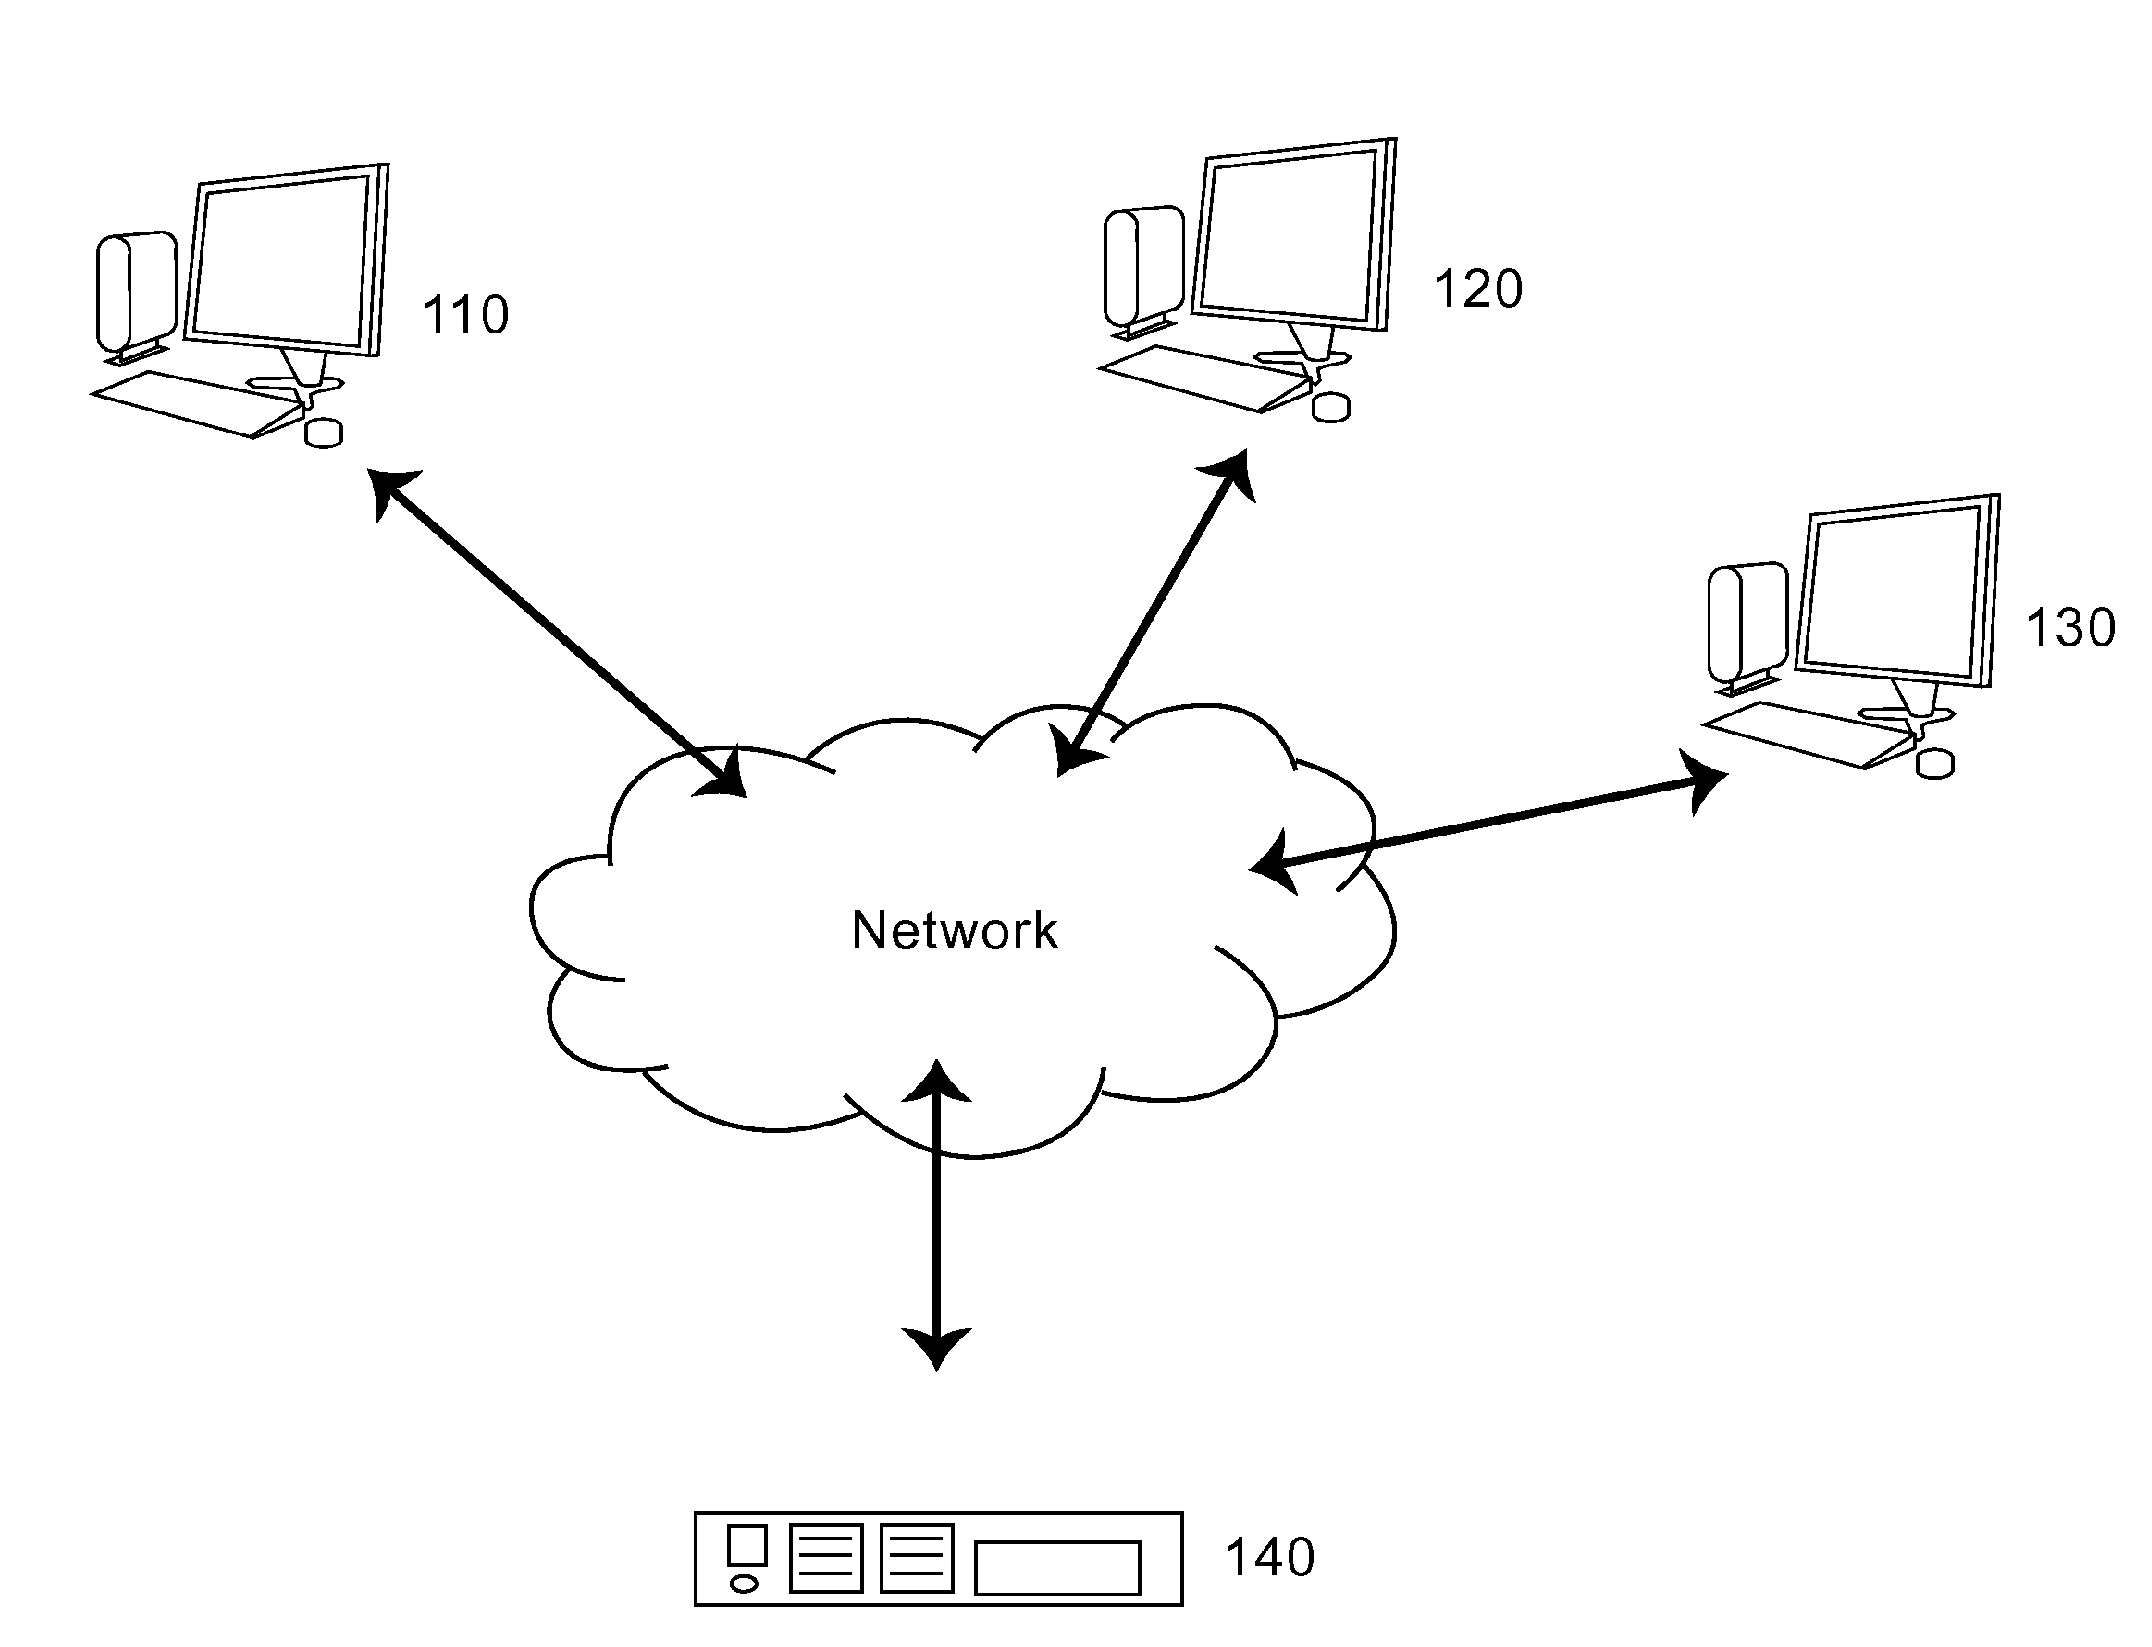 Methods and systems for dynamic adjustment of session parameters for effective video collaboration among heterogeneous devices